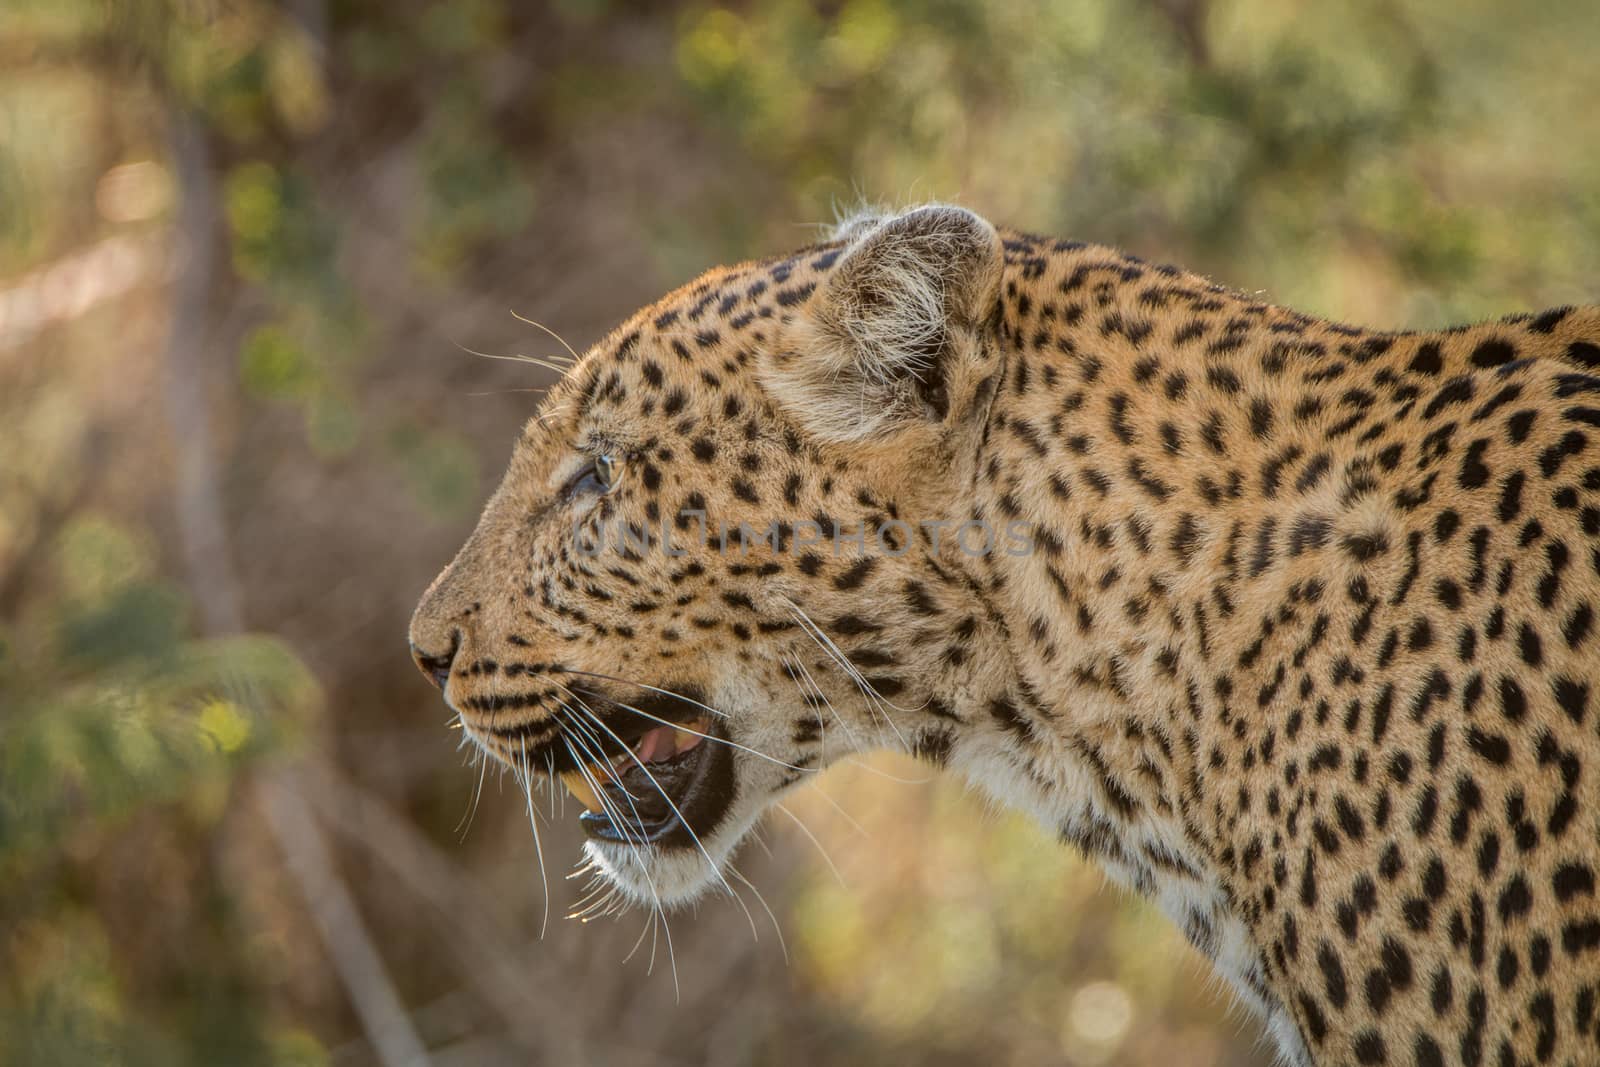 Side profile of a Leopard in the Kruger National Park, South Africa.